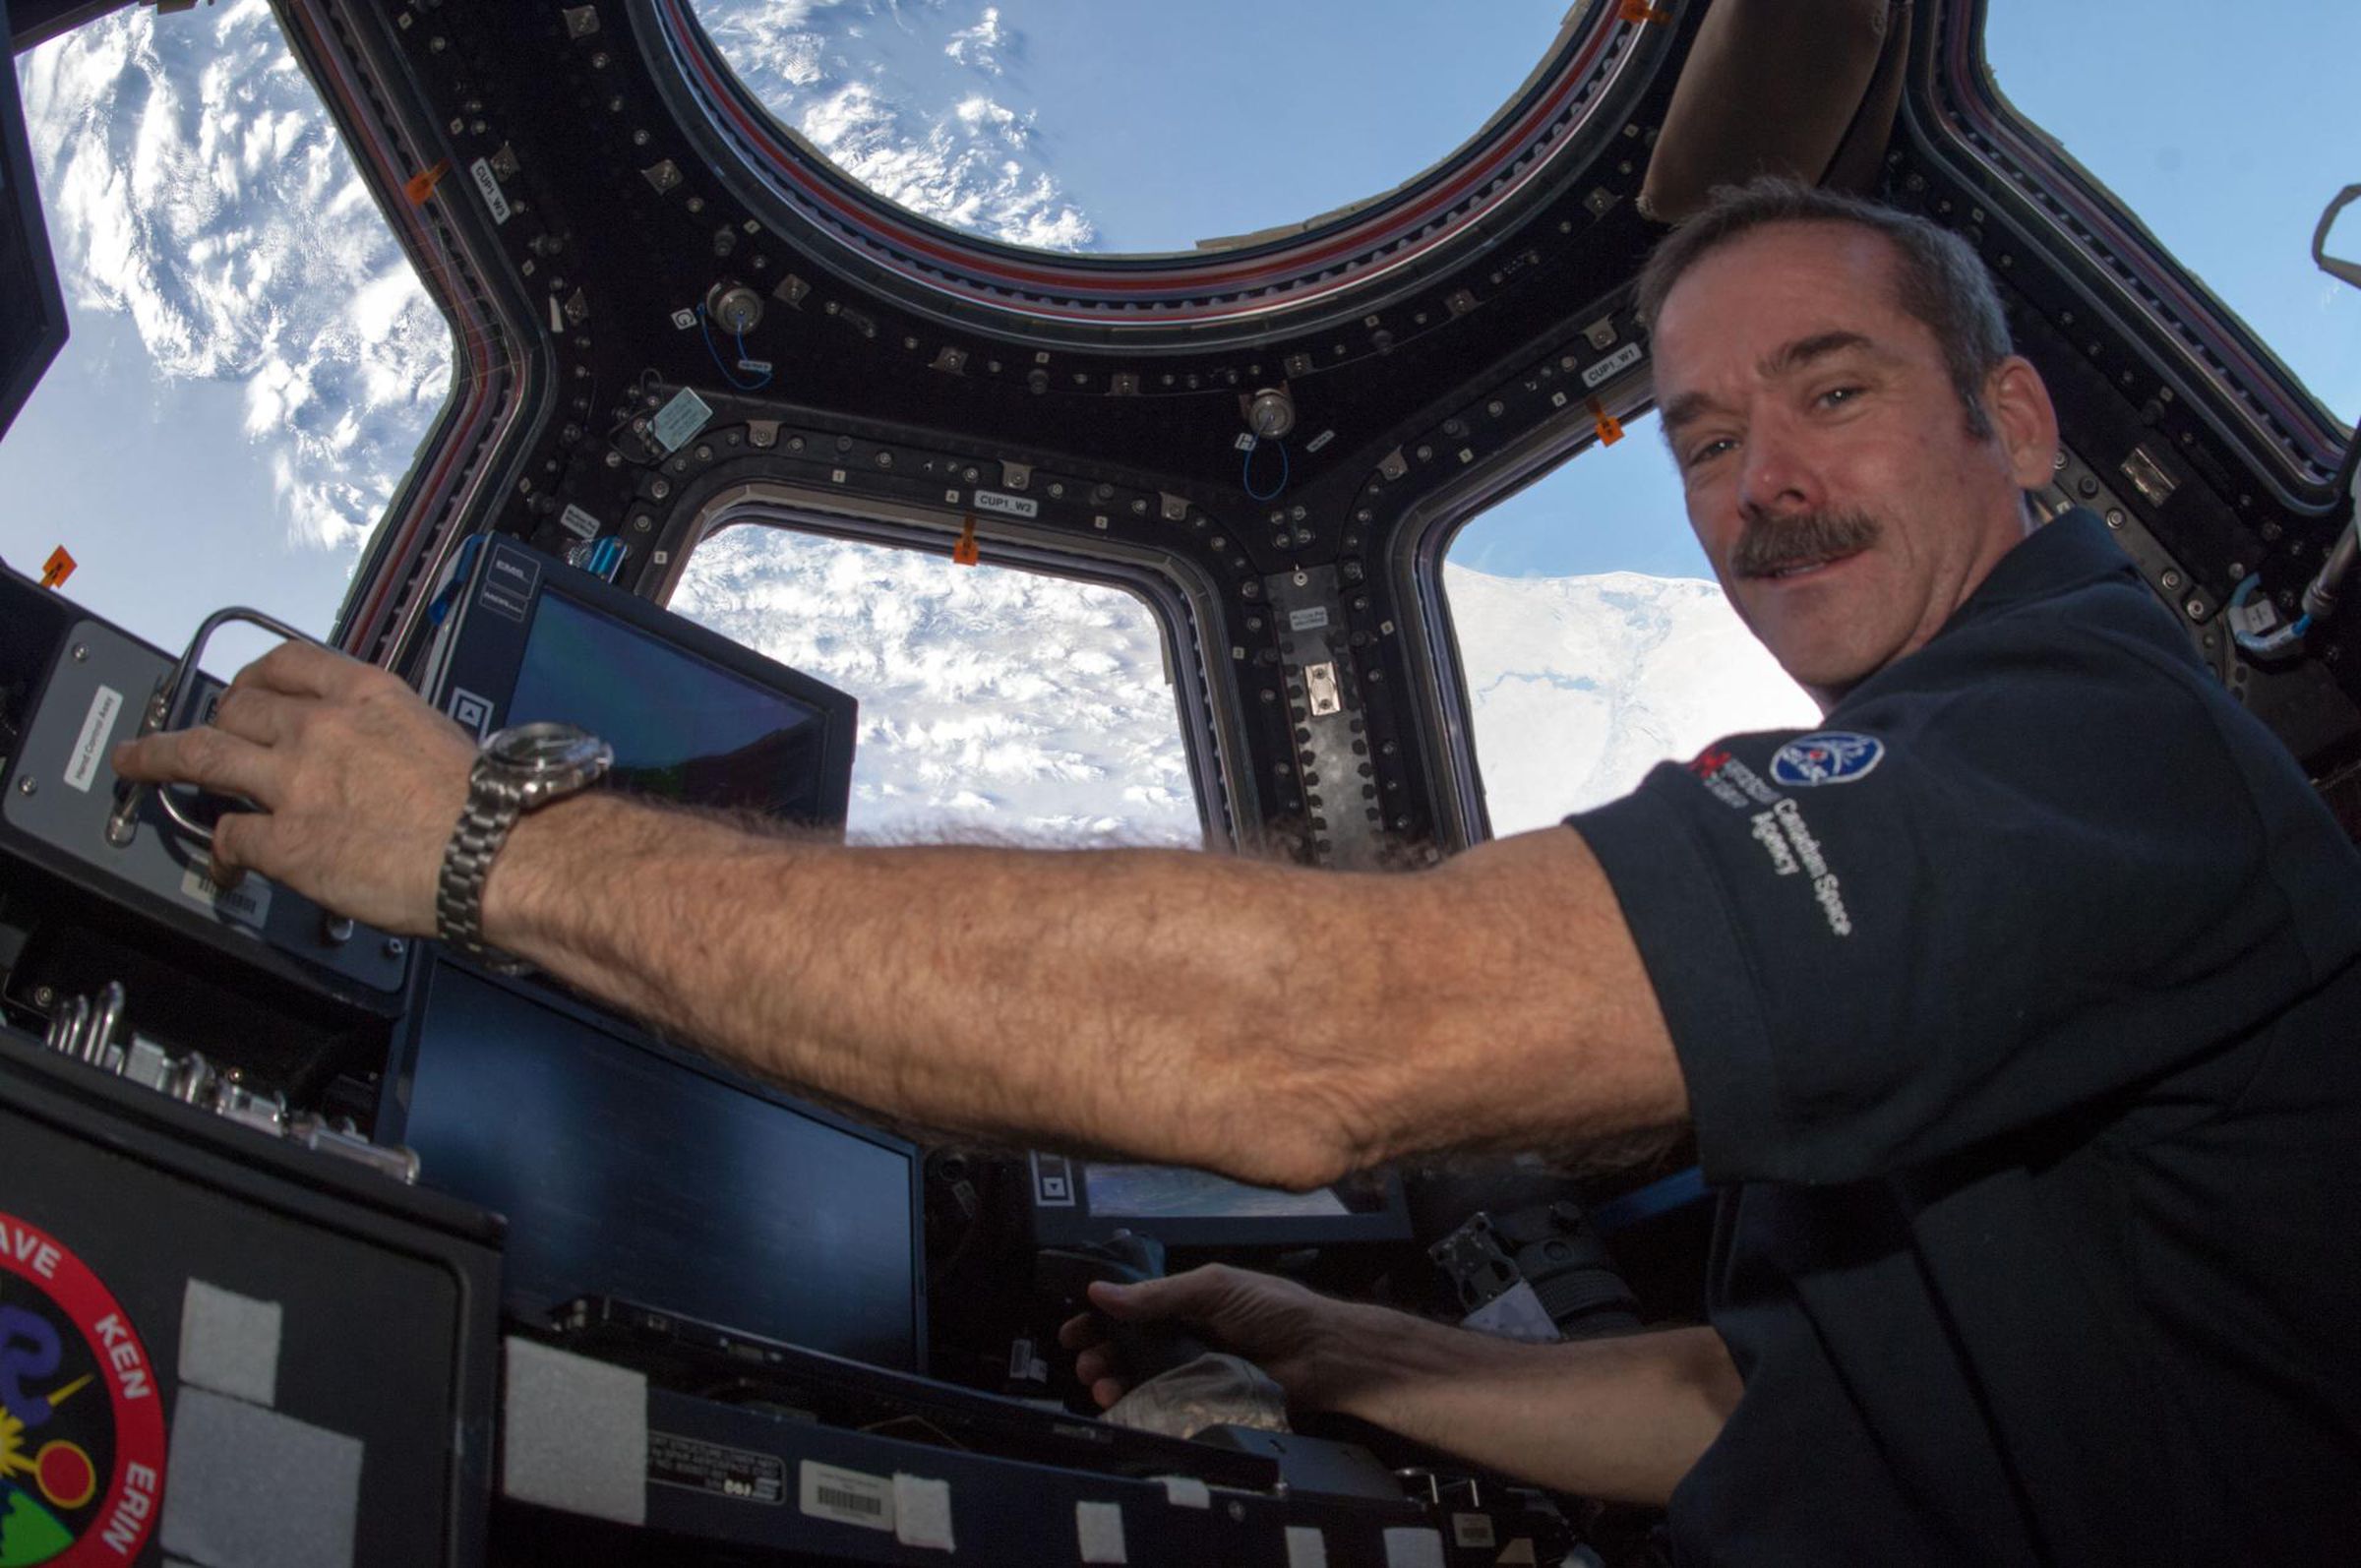 Astronaut Chris Hadfield in the ISS Cupola.